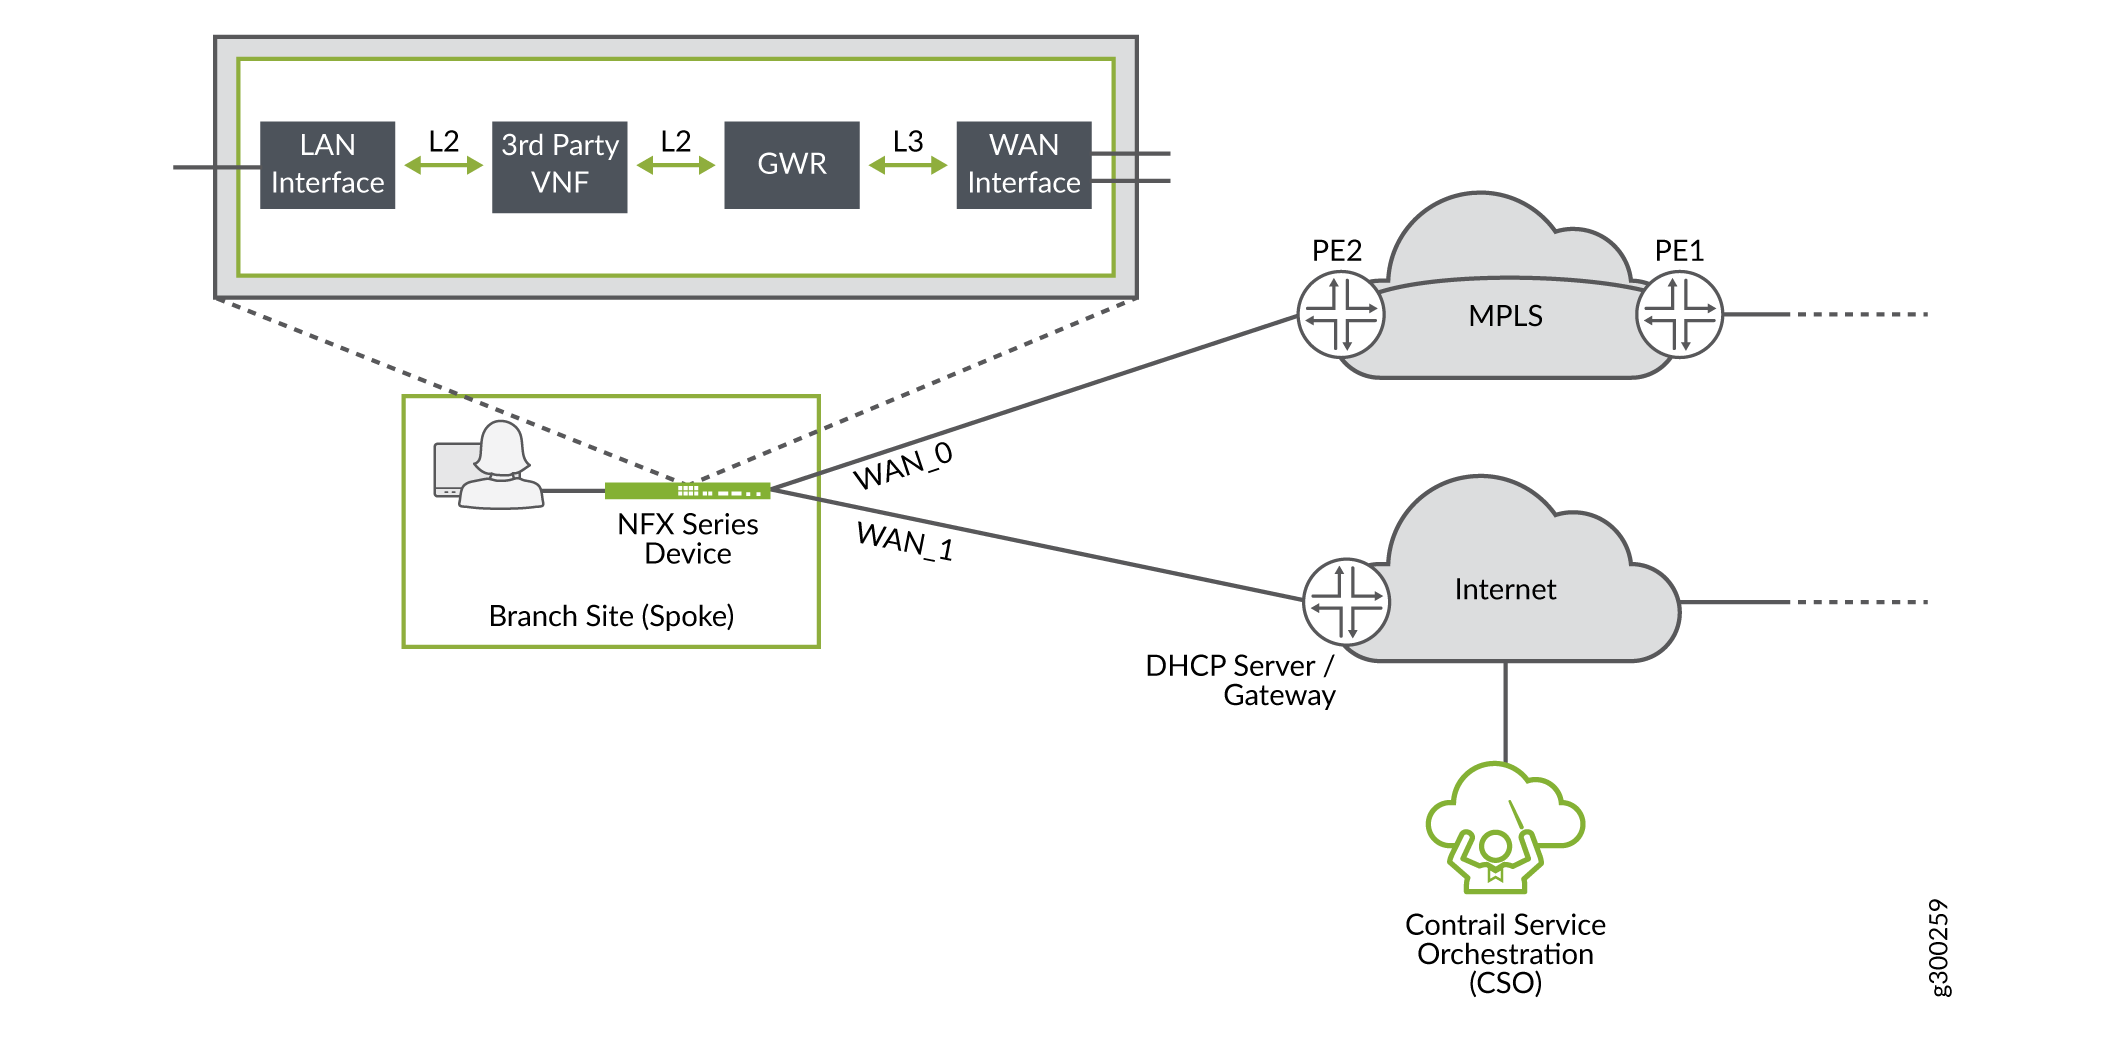 Service Chaining in an SD-WAN Environment